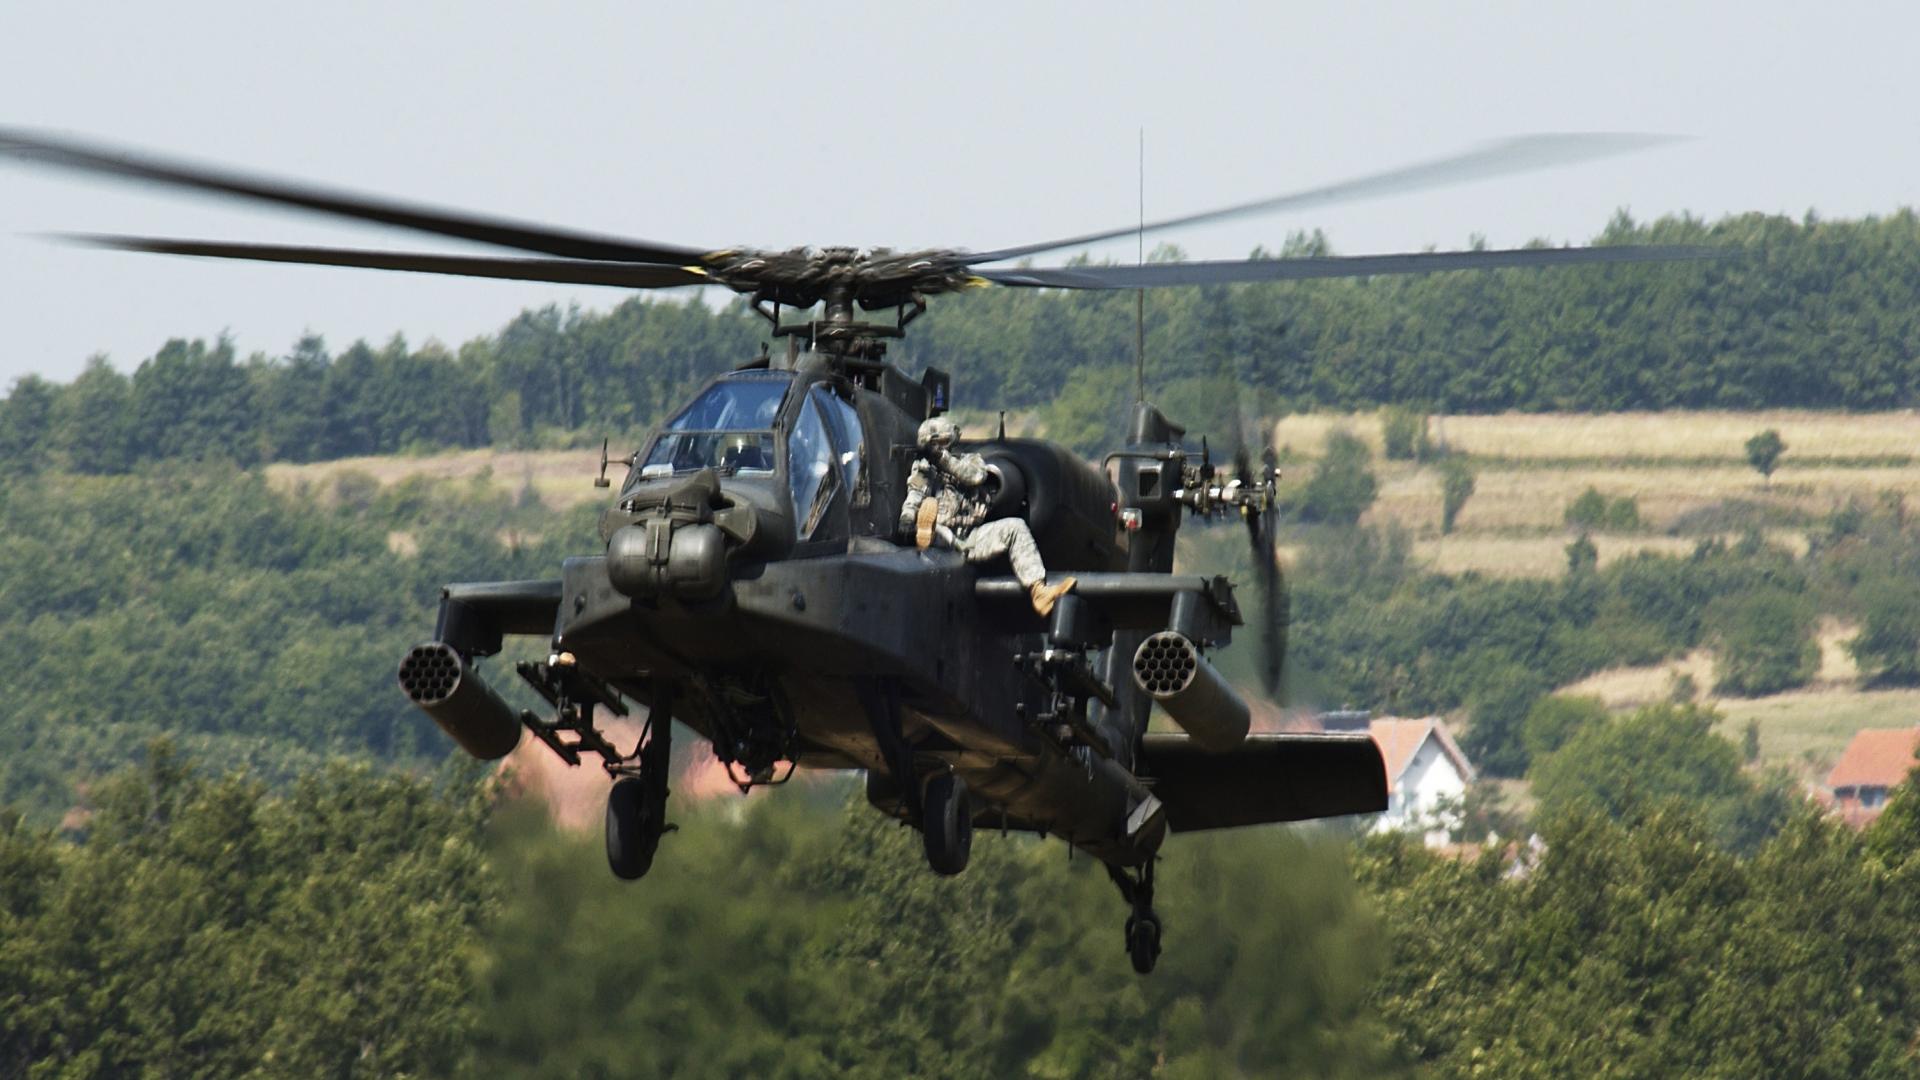 Ah 64d apache army helicopter